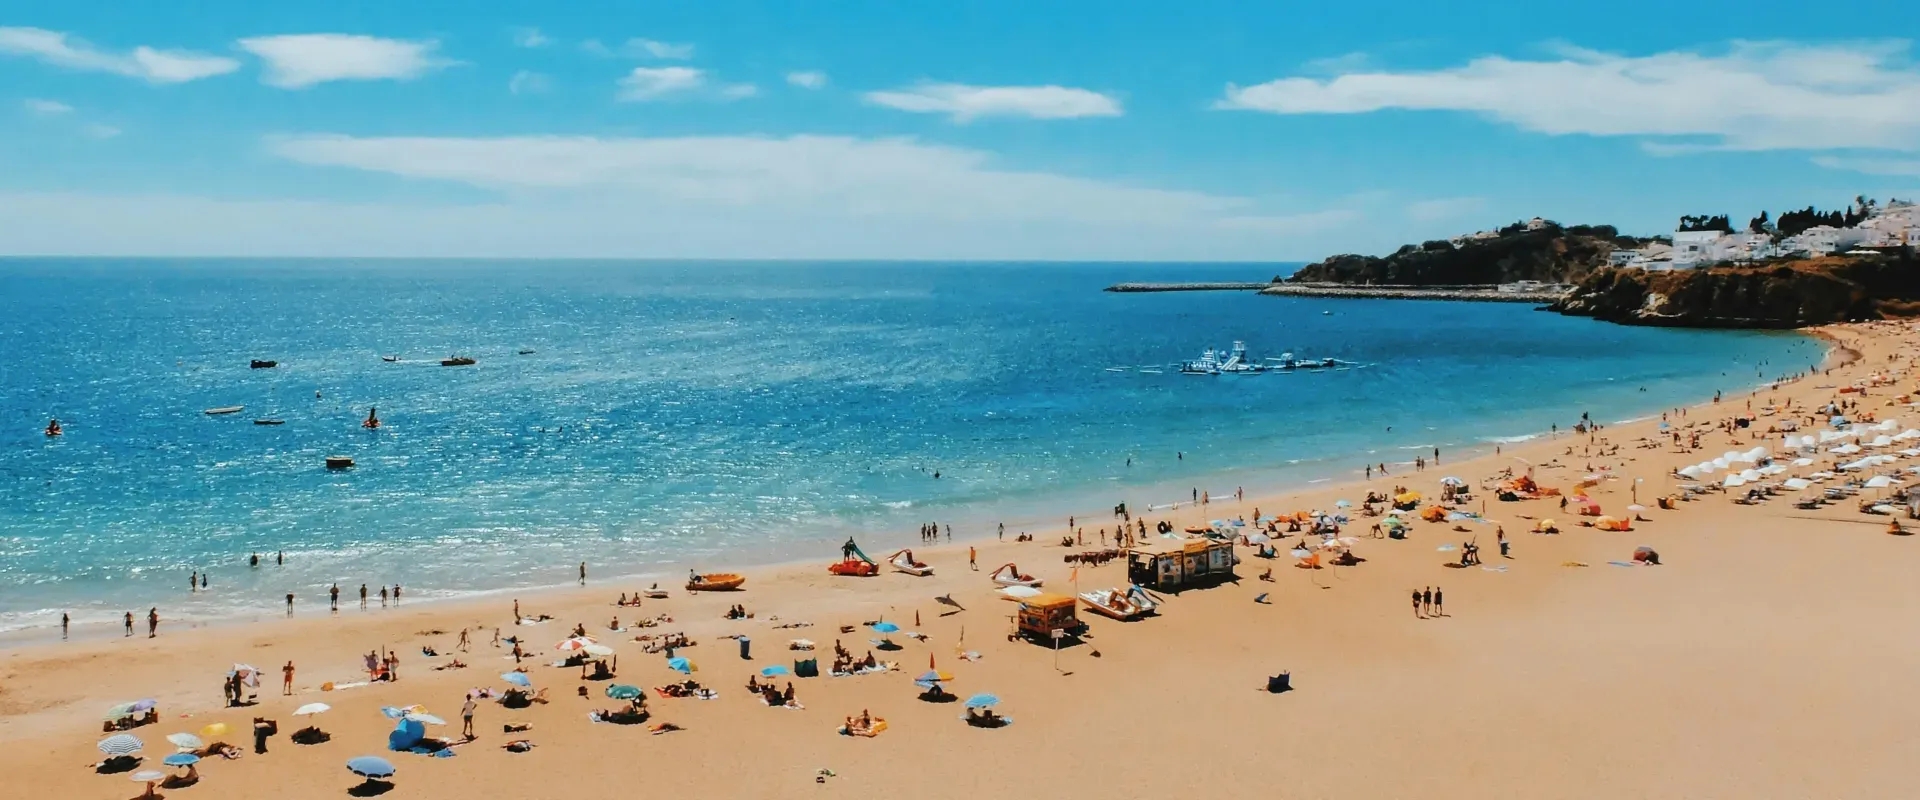 People lay on a beach in the Algarve, Portugal